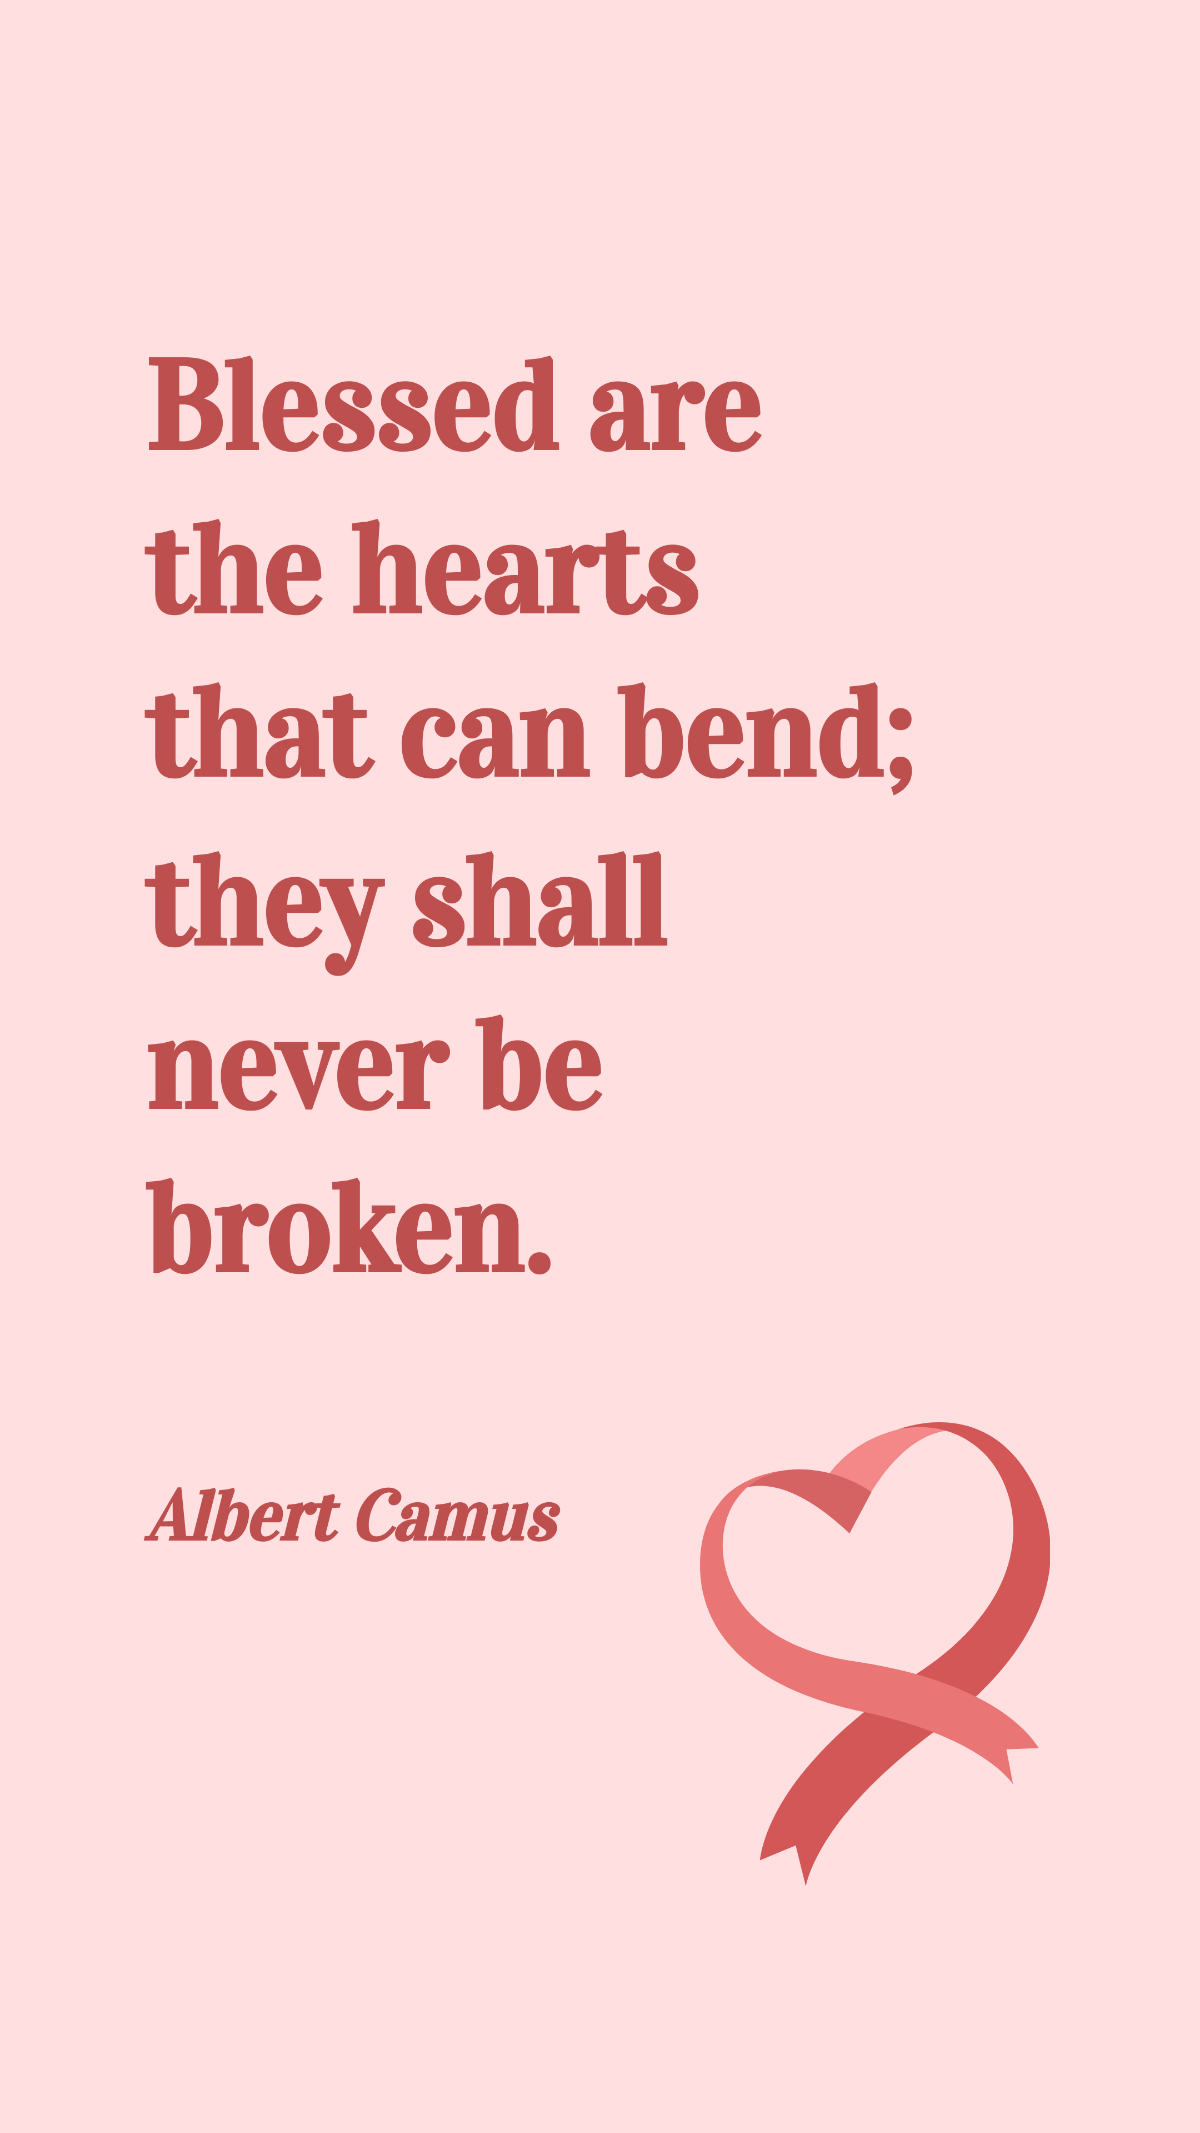 Free Albert Camus - Blessed are the hearts that can bend; they shall never be broken. Template